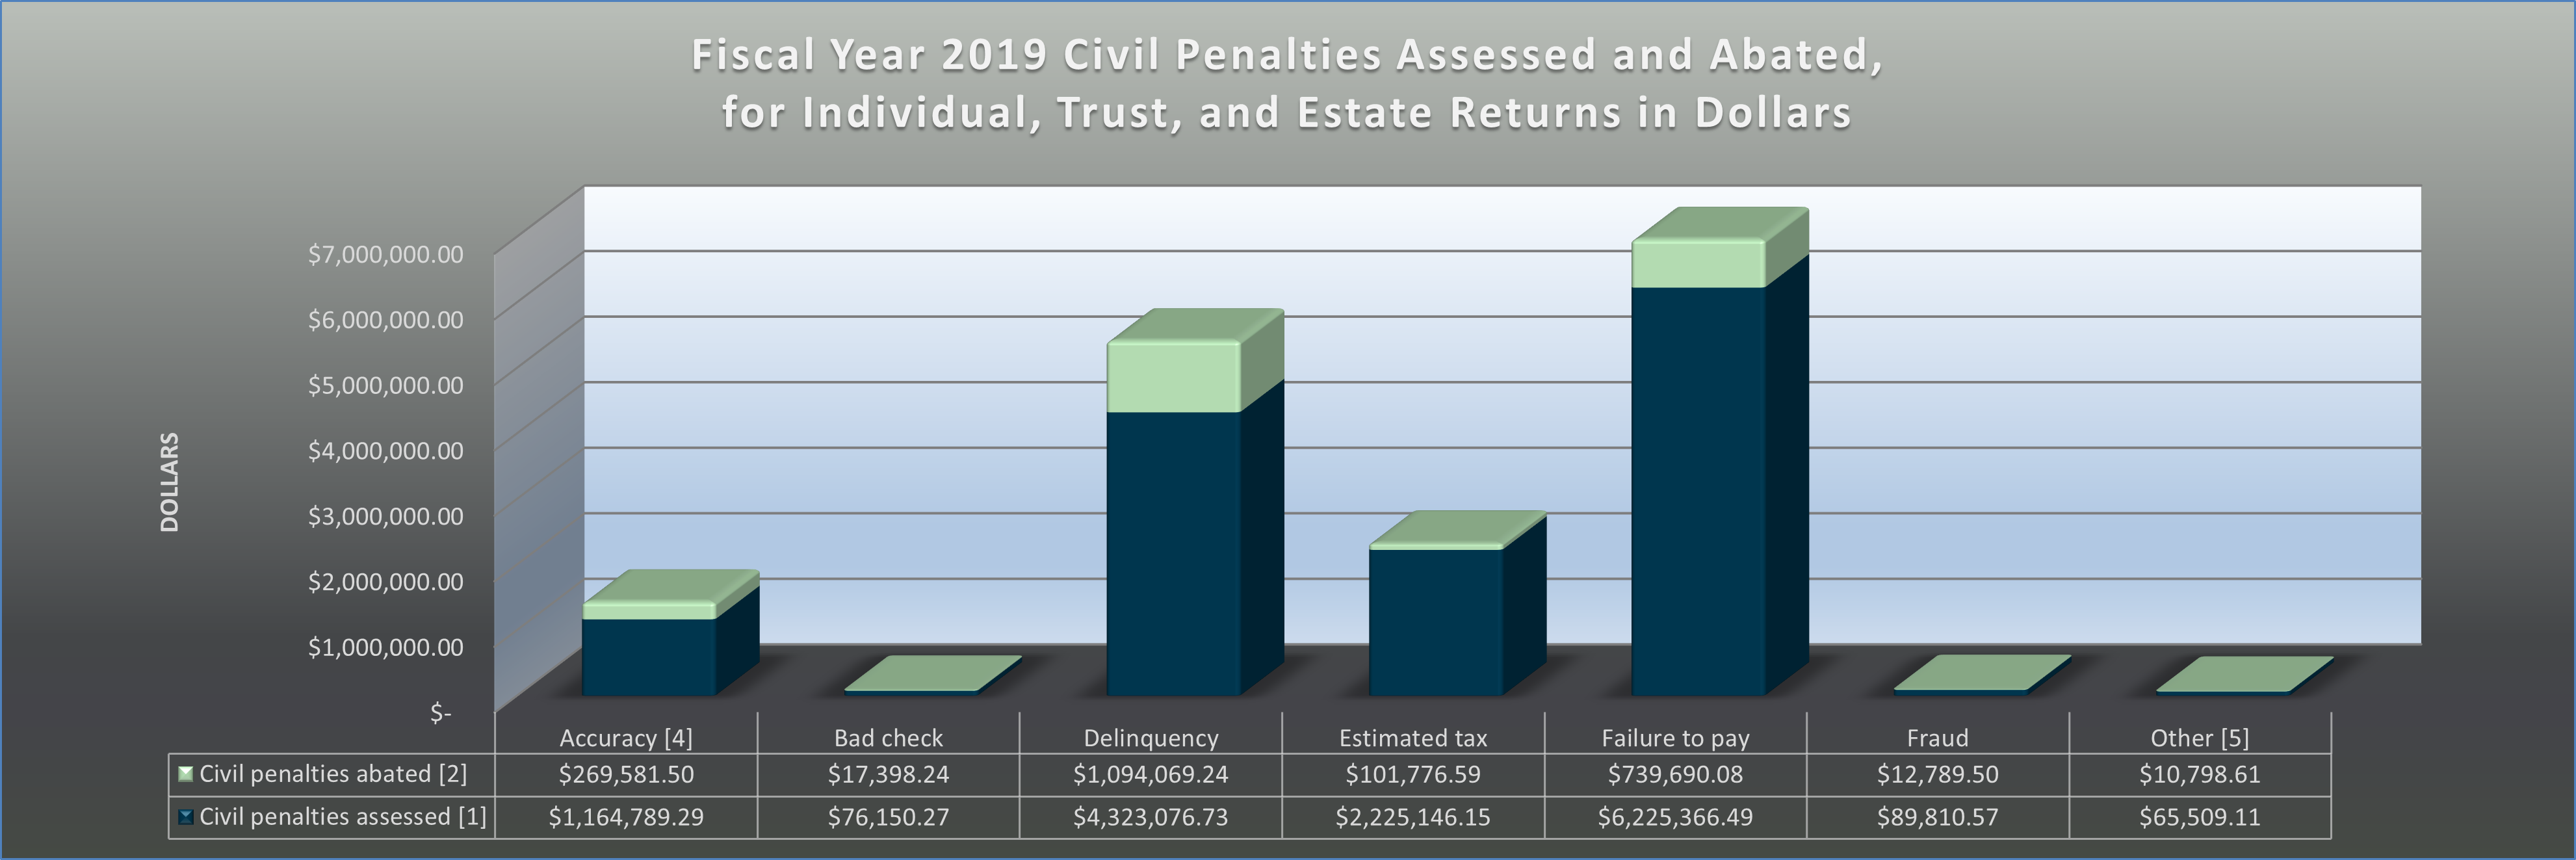 Fiscal Year 2019 Civil Penalties Assessed and Abated in Dollars 4x12